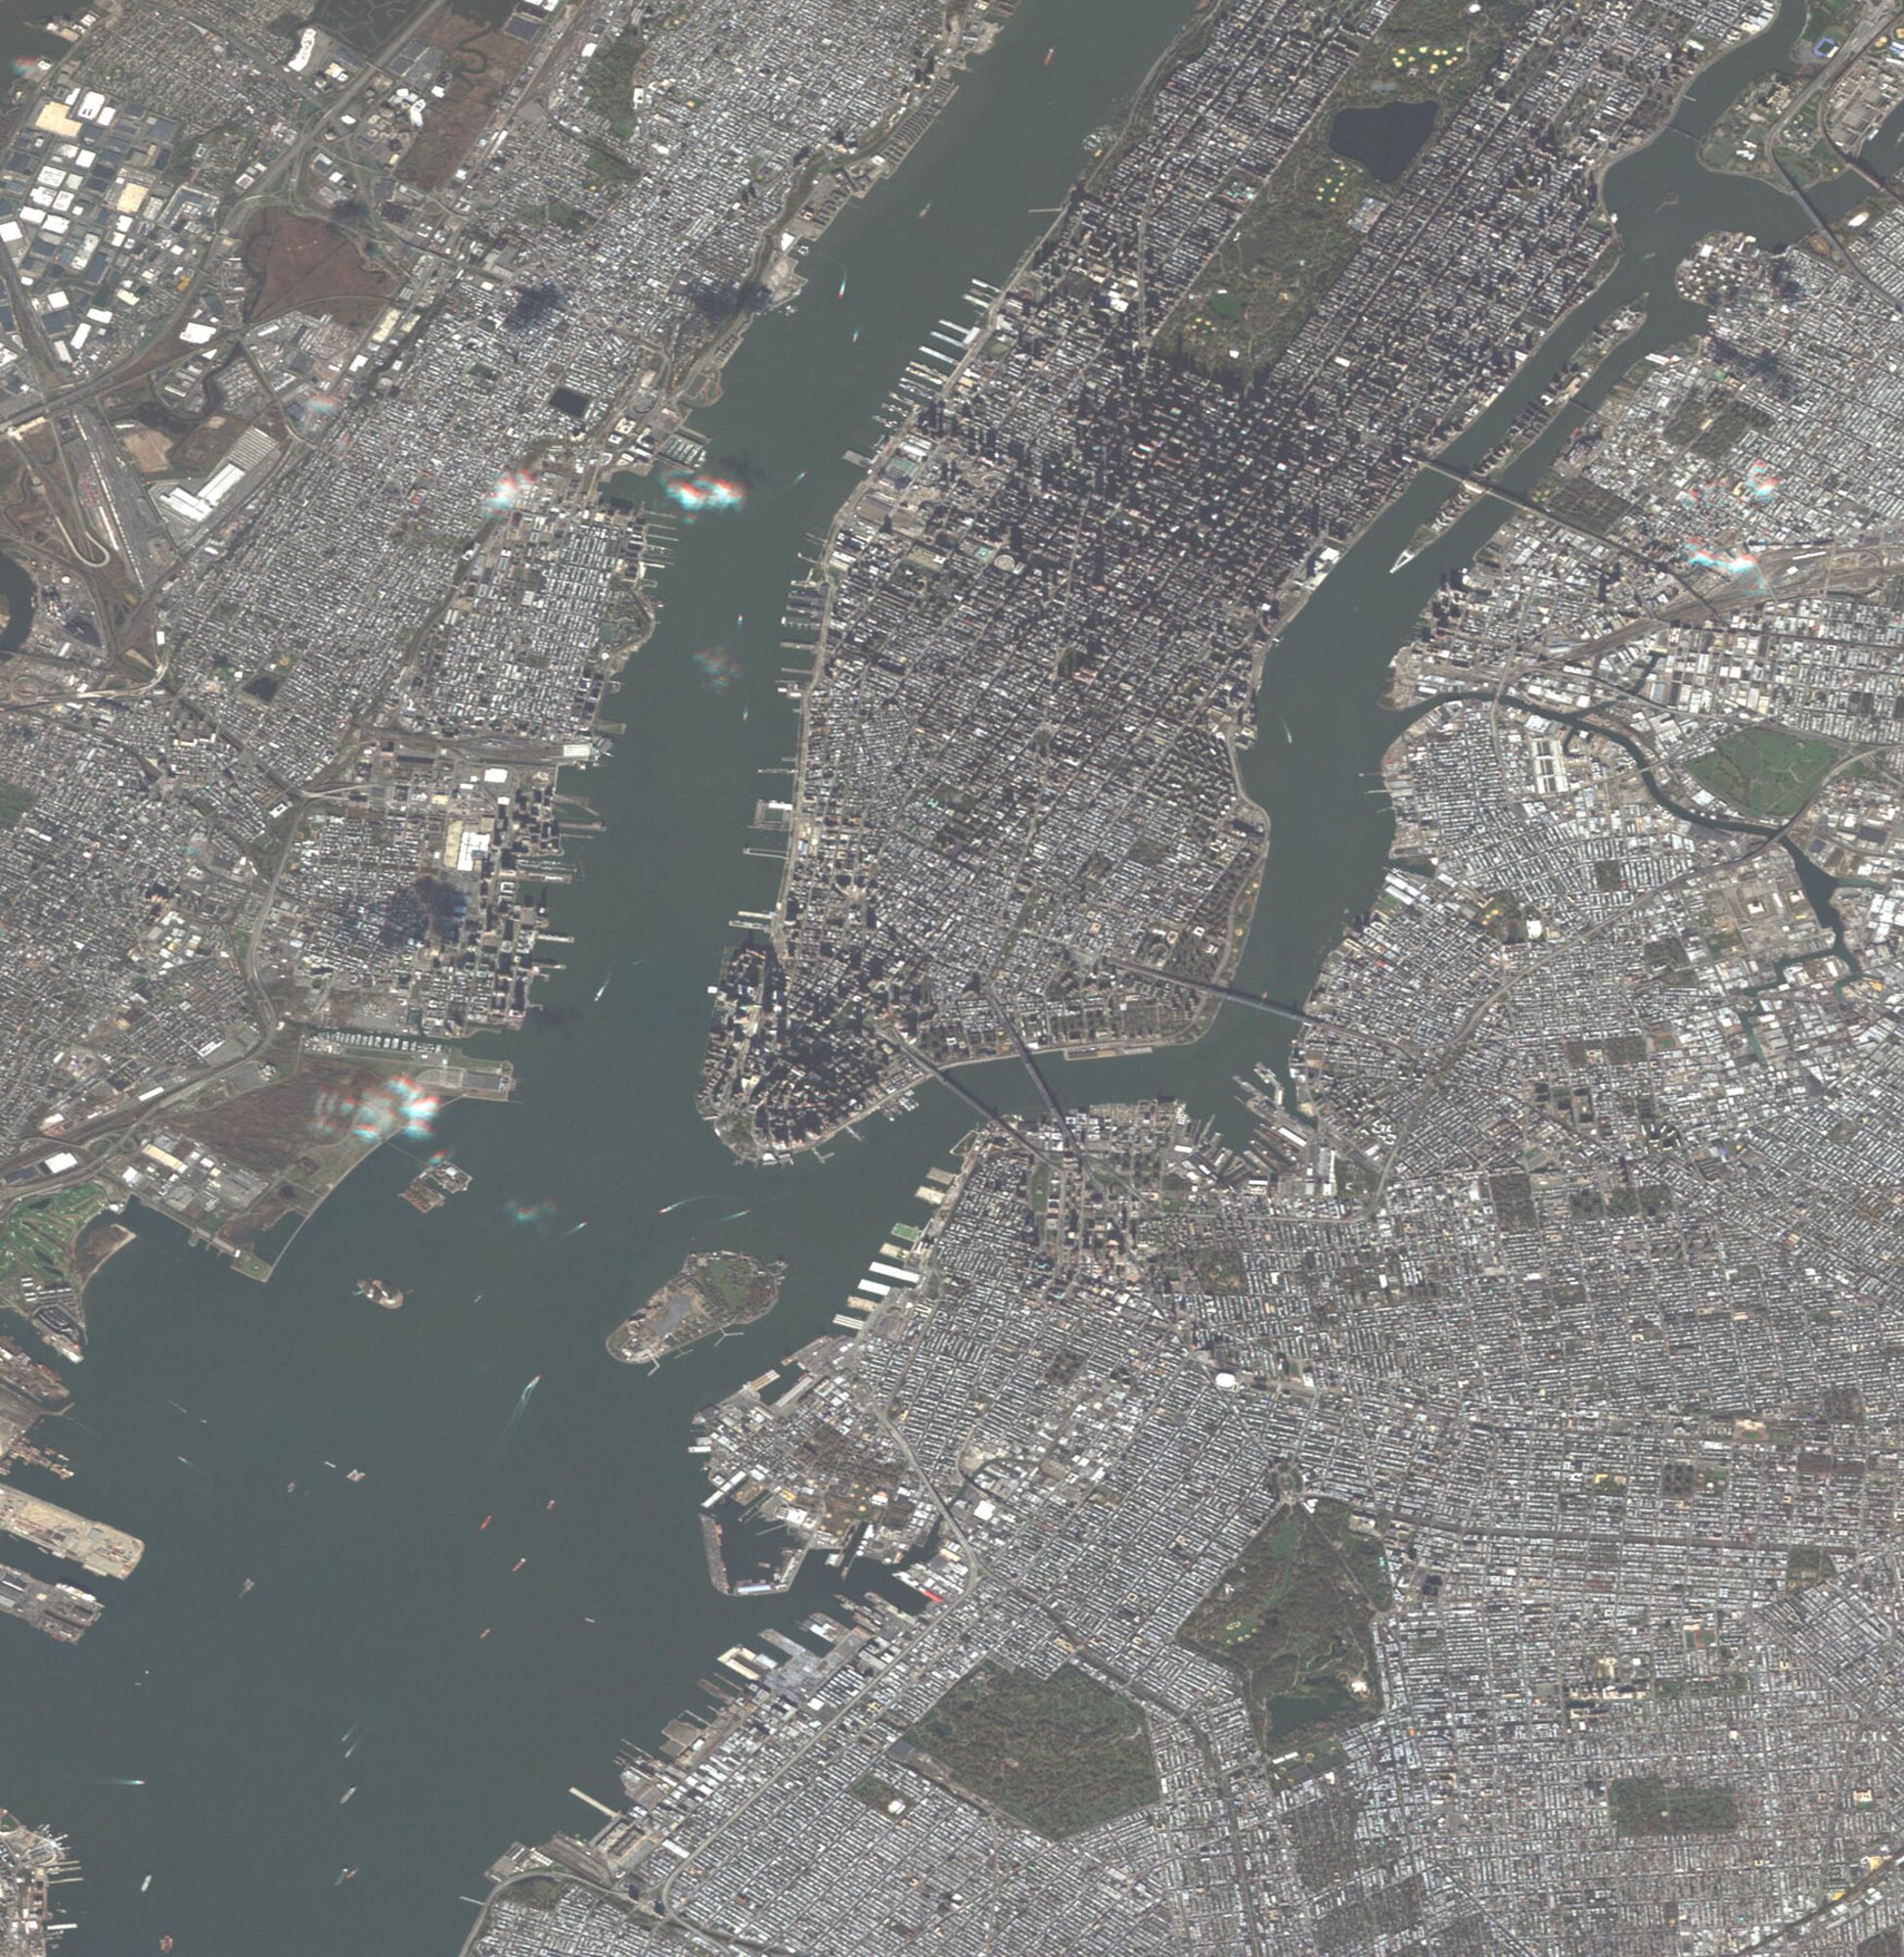 Photo EV-Sandy
This satellite imagery of lower Manhattan taken after Hurricane Sandy ravaged many ocean-facing communities in the northeast is one of many provided by the Hanscom-based Eagle Vision program to emergency responders and others aiding in recovery efforts. (Courtesy image)
